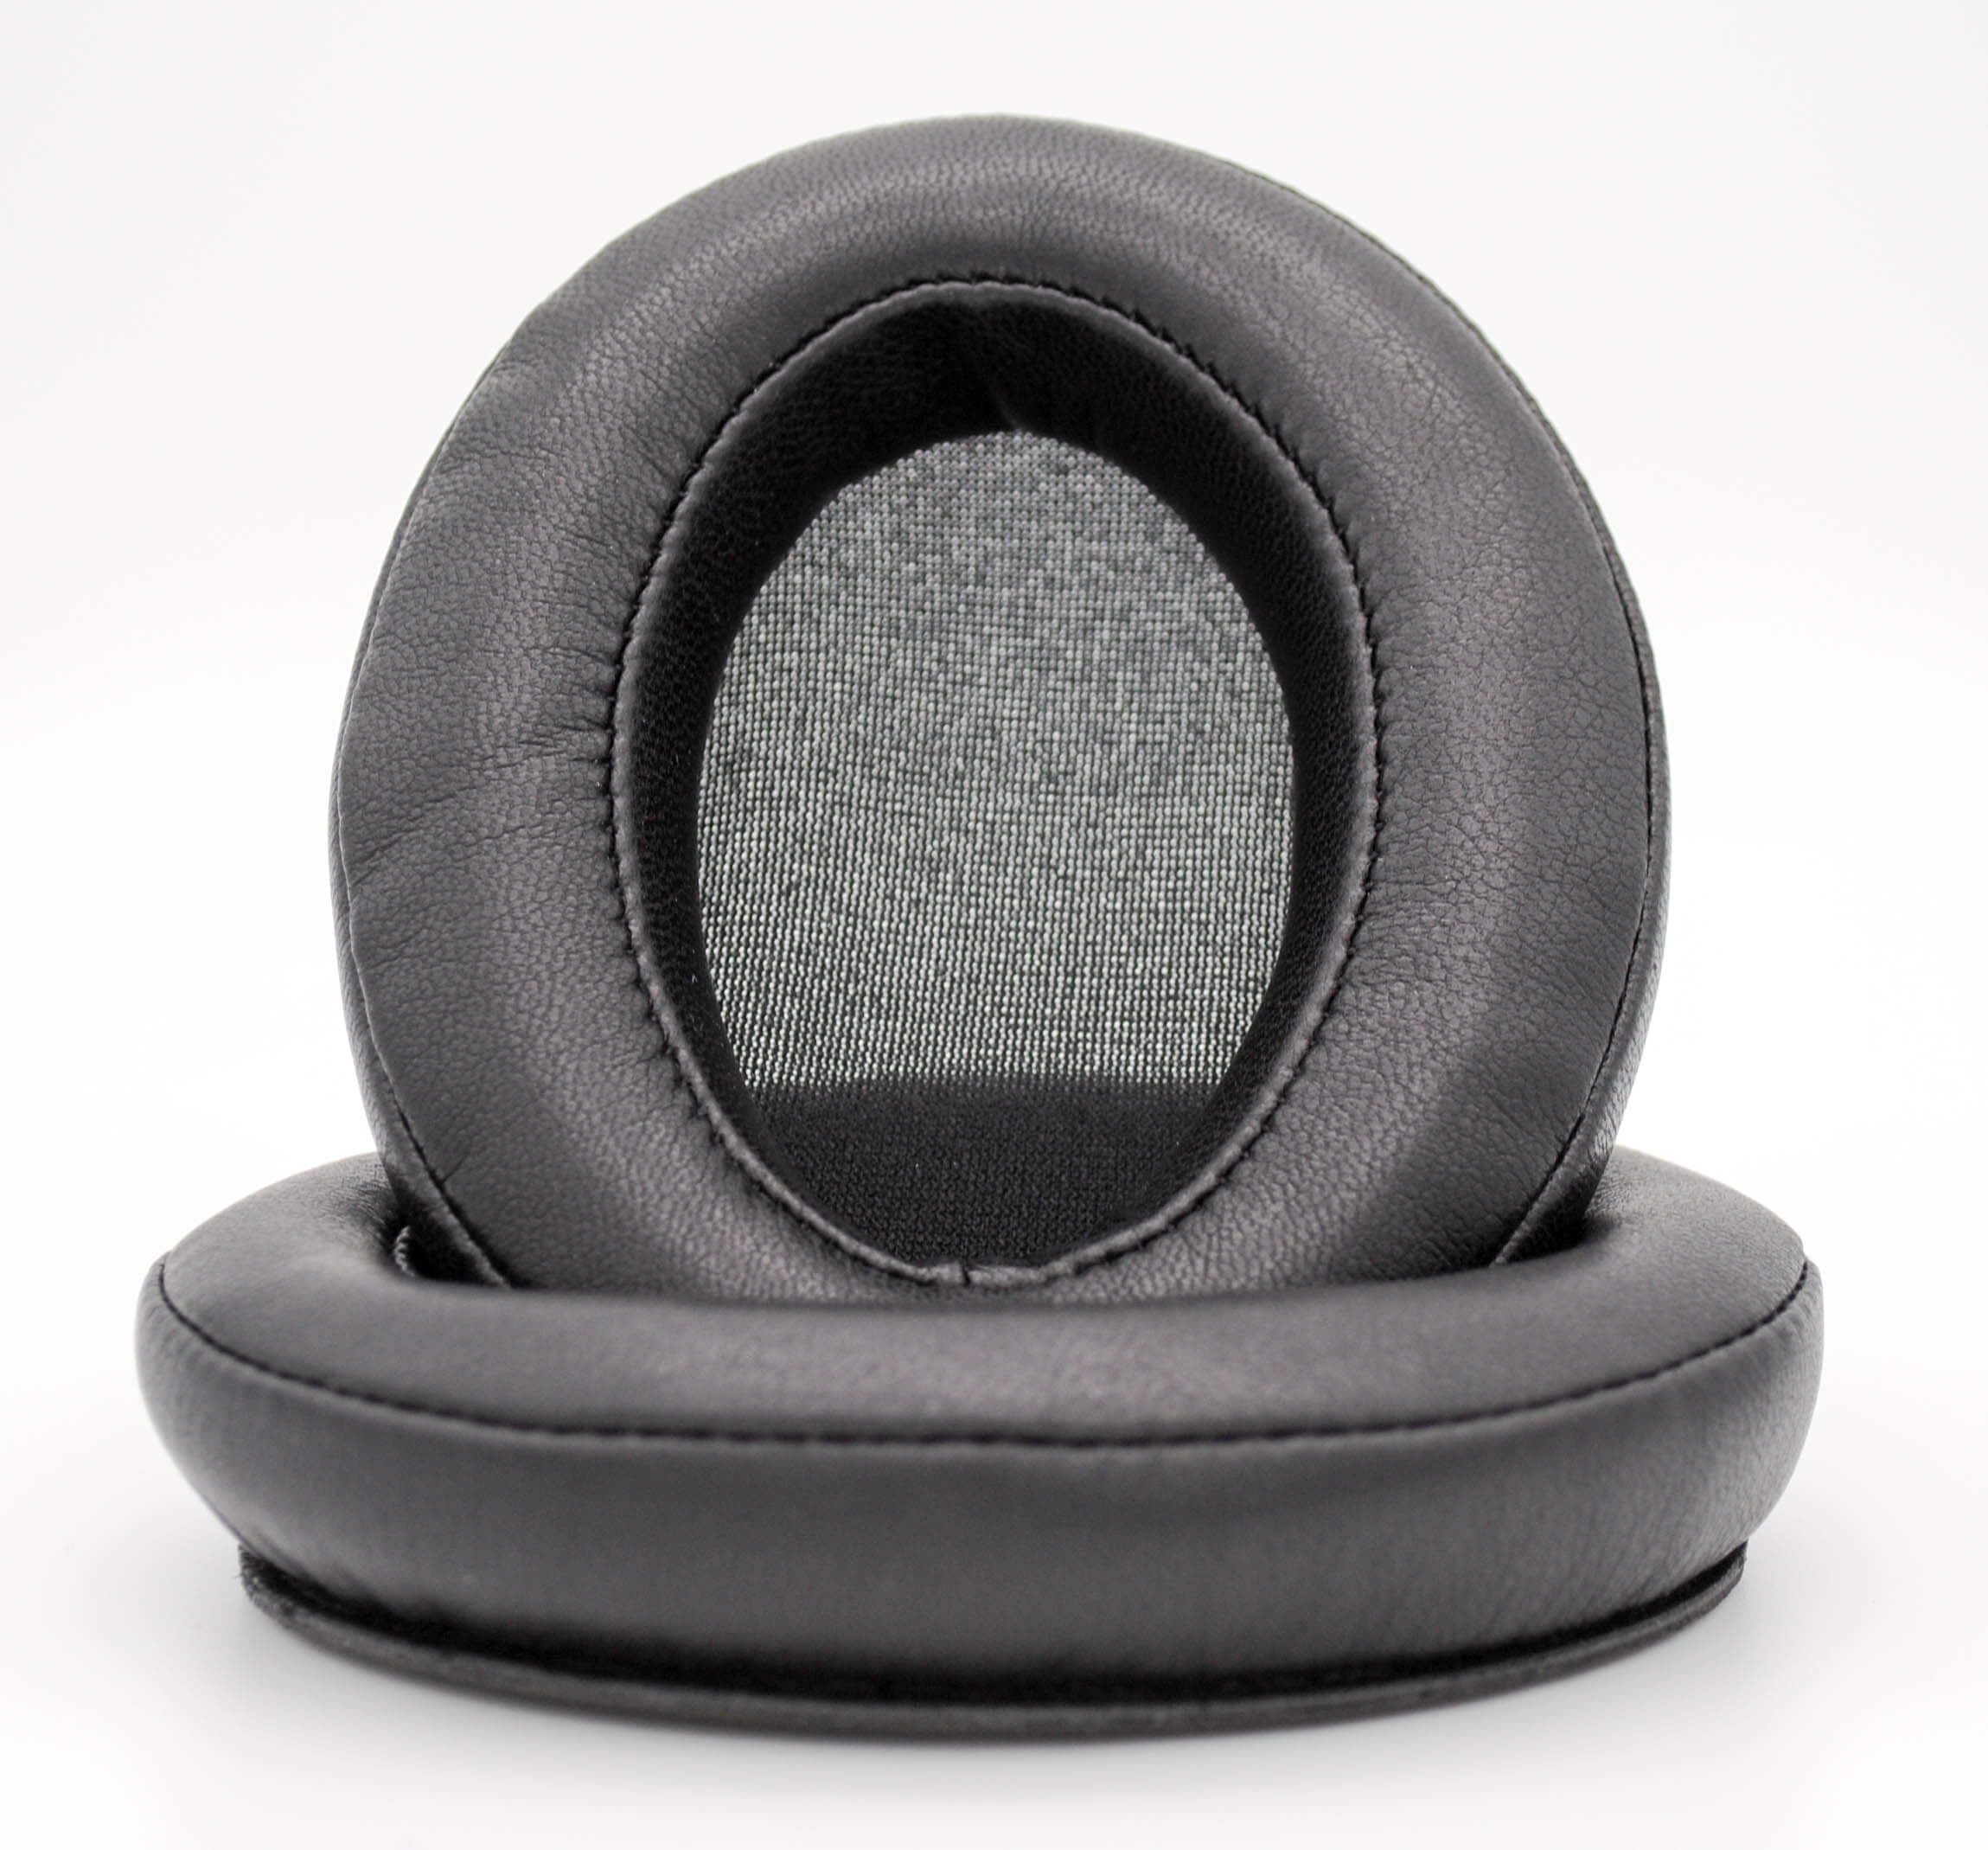 Replacement Ear Pad Leather Foam Cushion for Quiet Comfort QC3 ON EAR/OE DI 